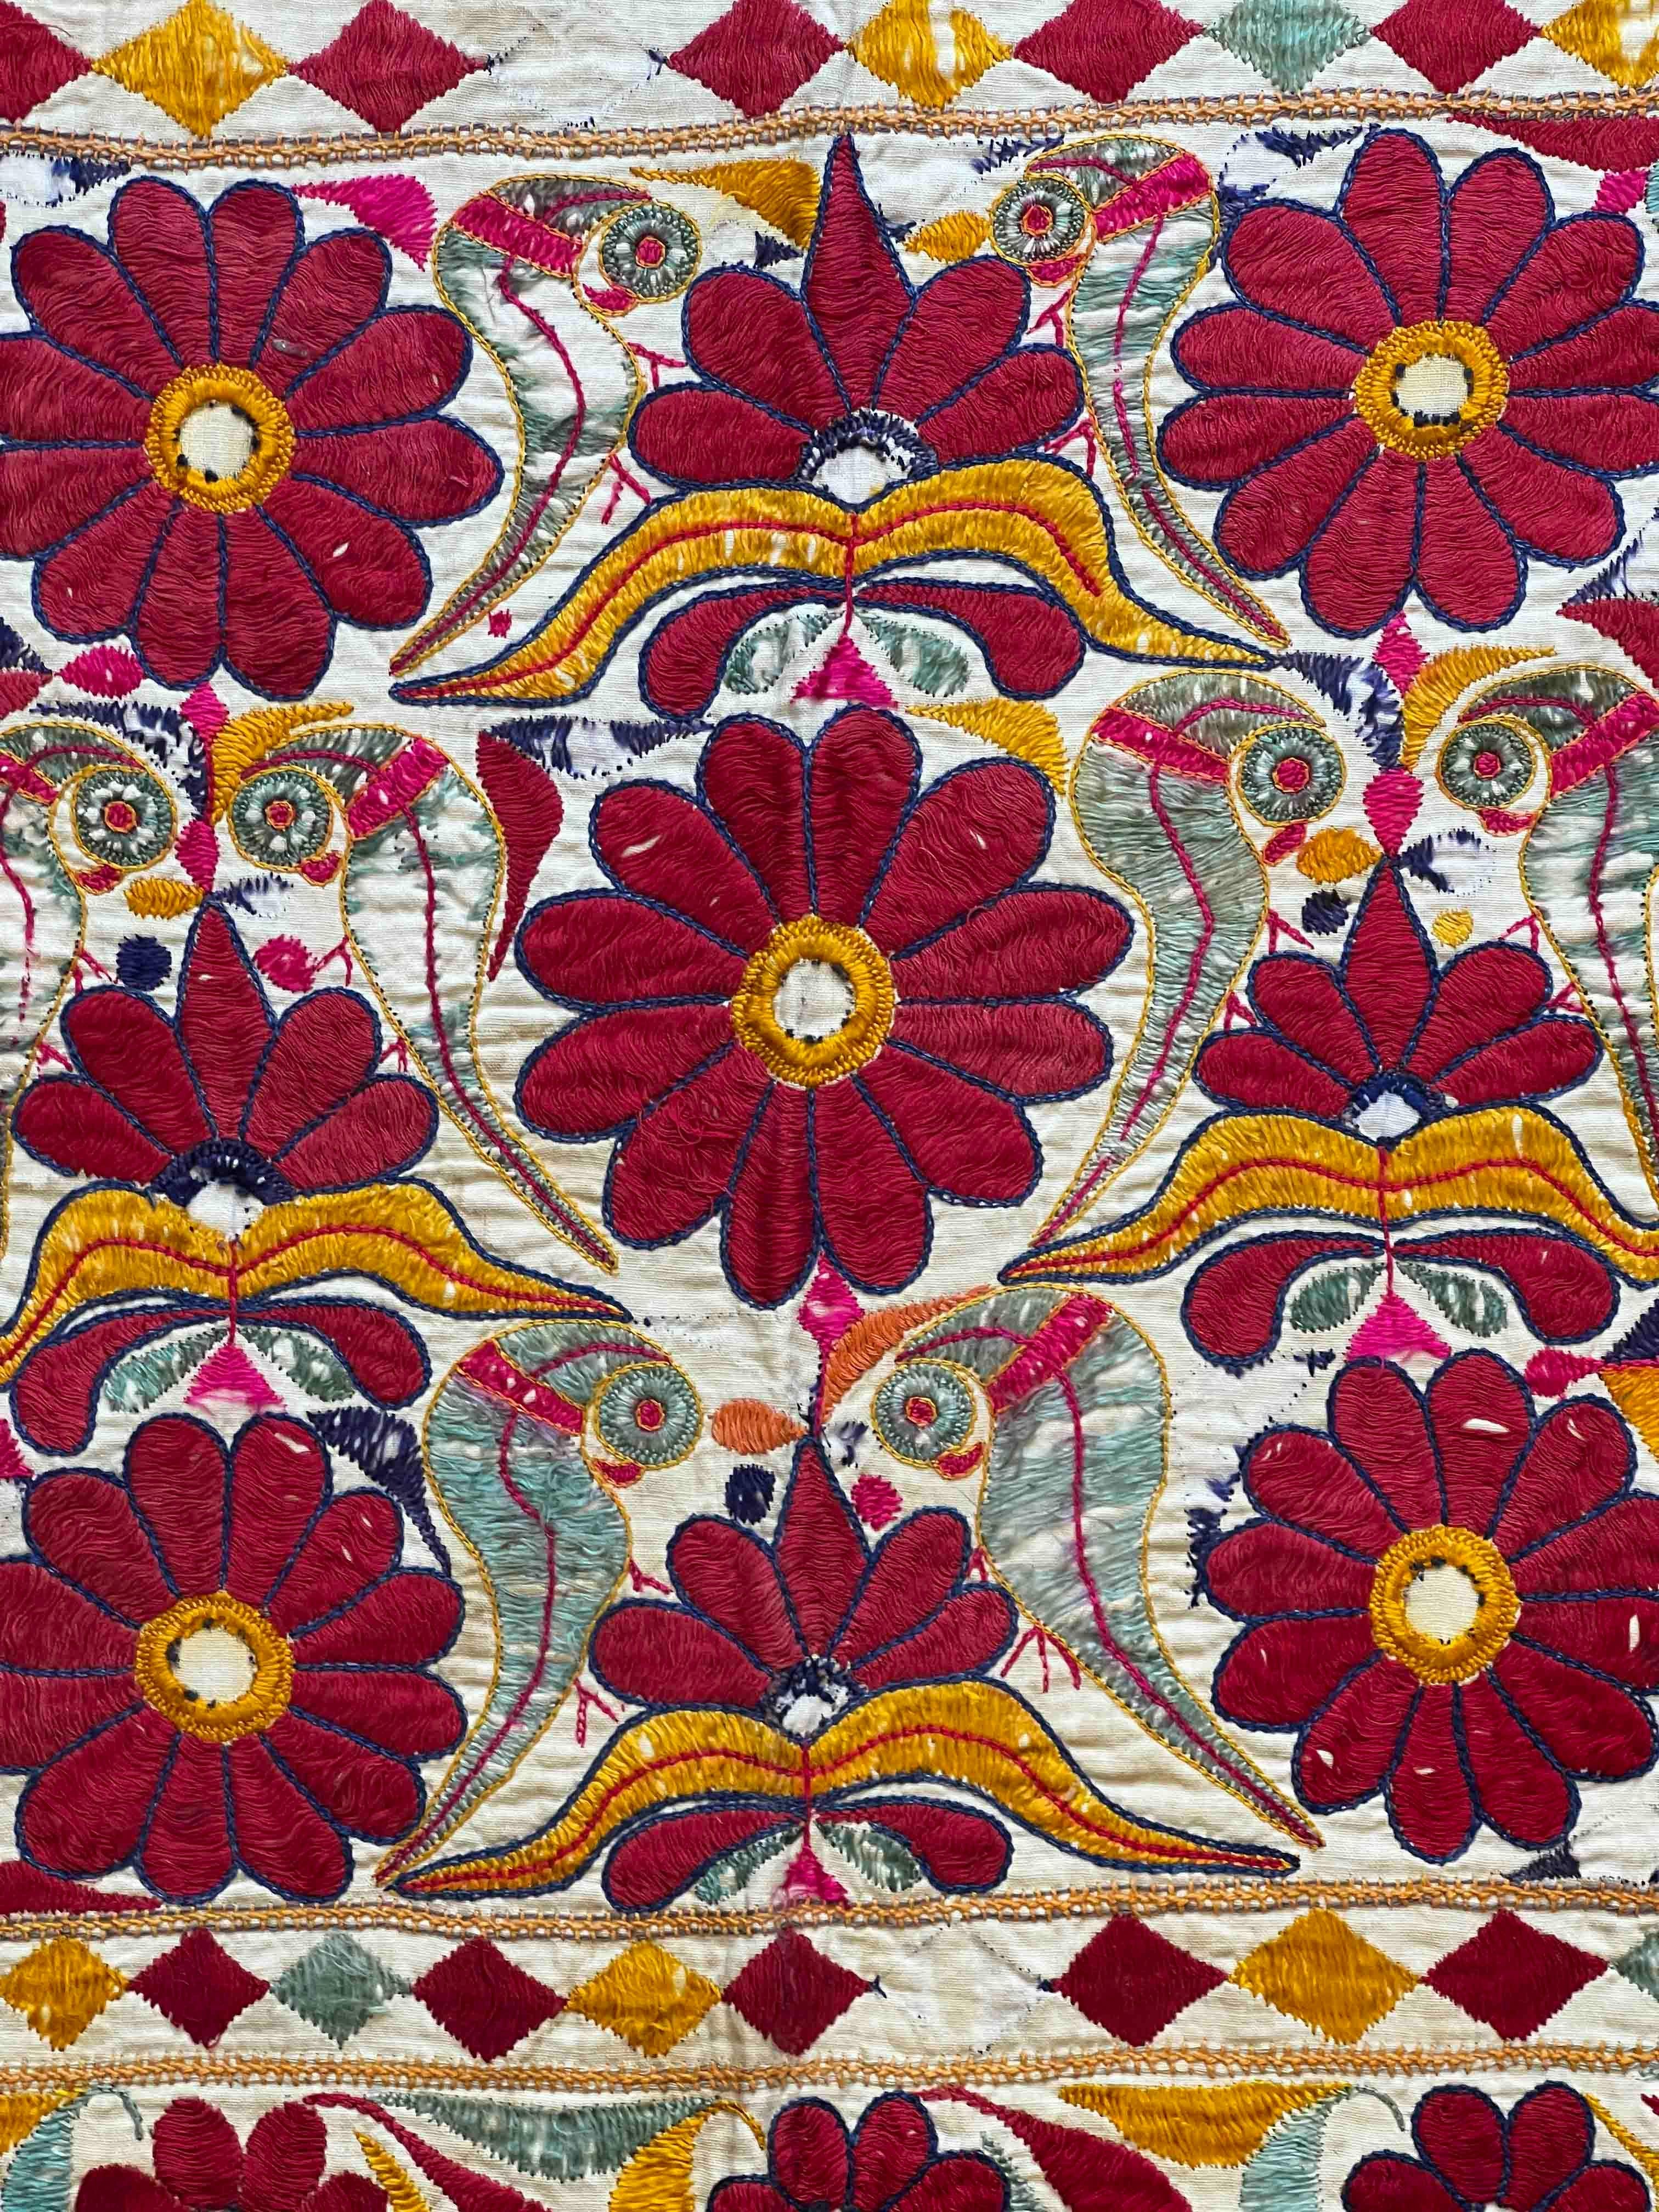 Hand-Crafted Indian Embroidery Fabric, N°1221 For Sale